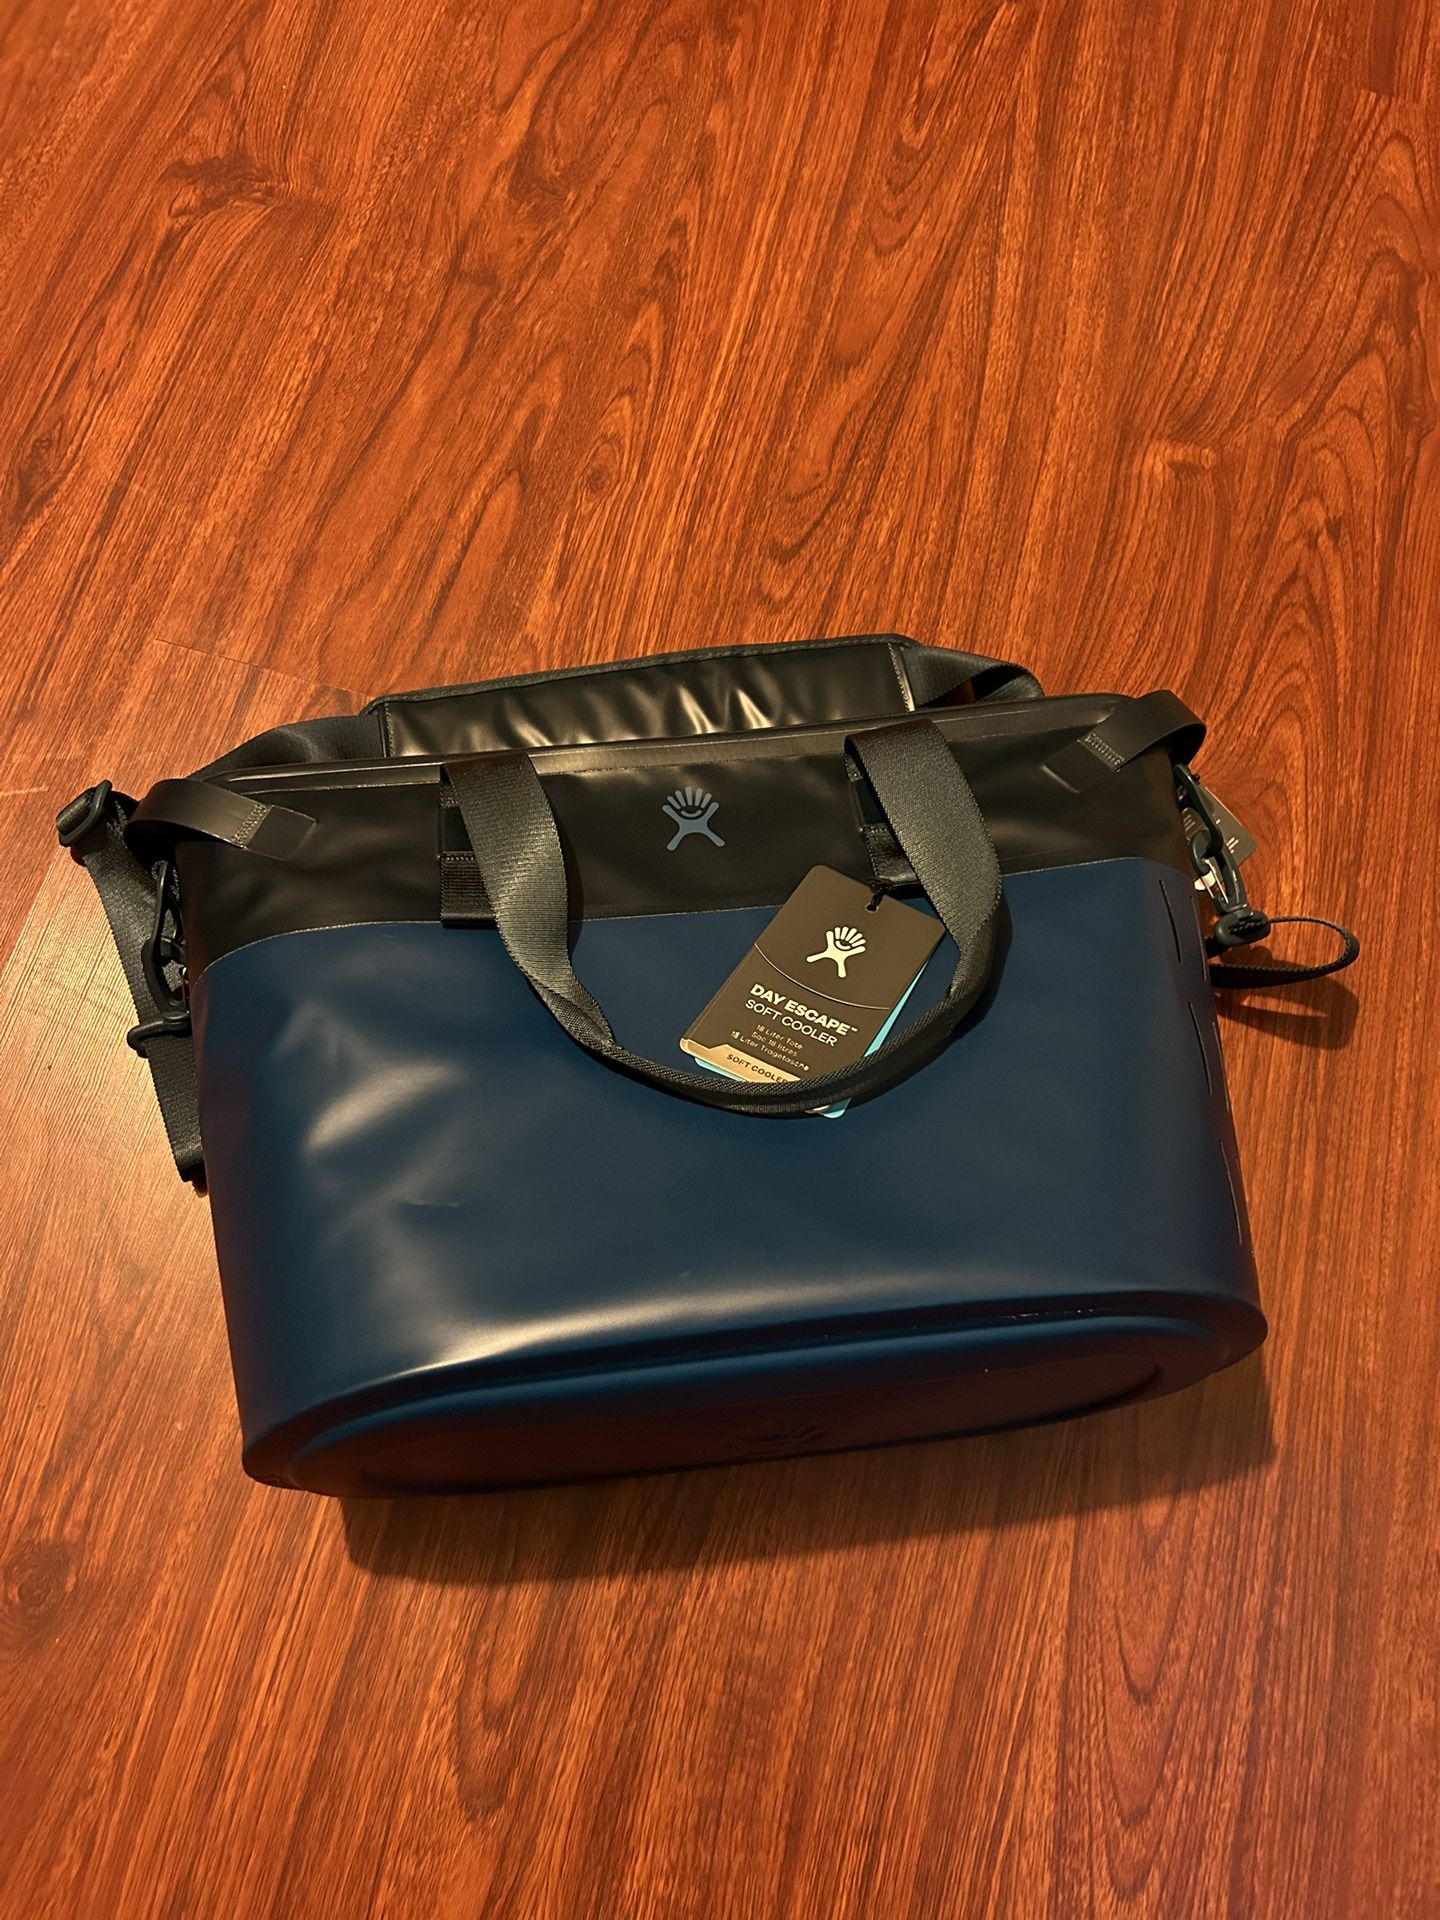 Hydro flask Tote Cooler Bag 